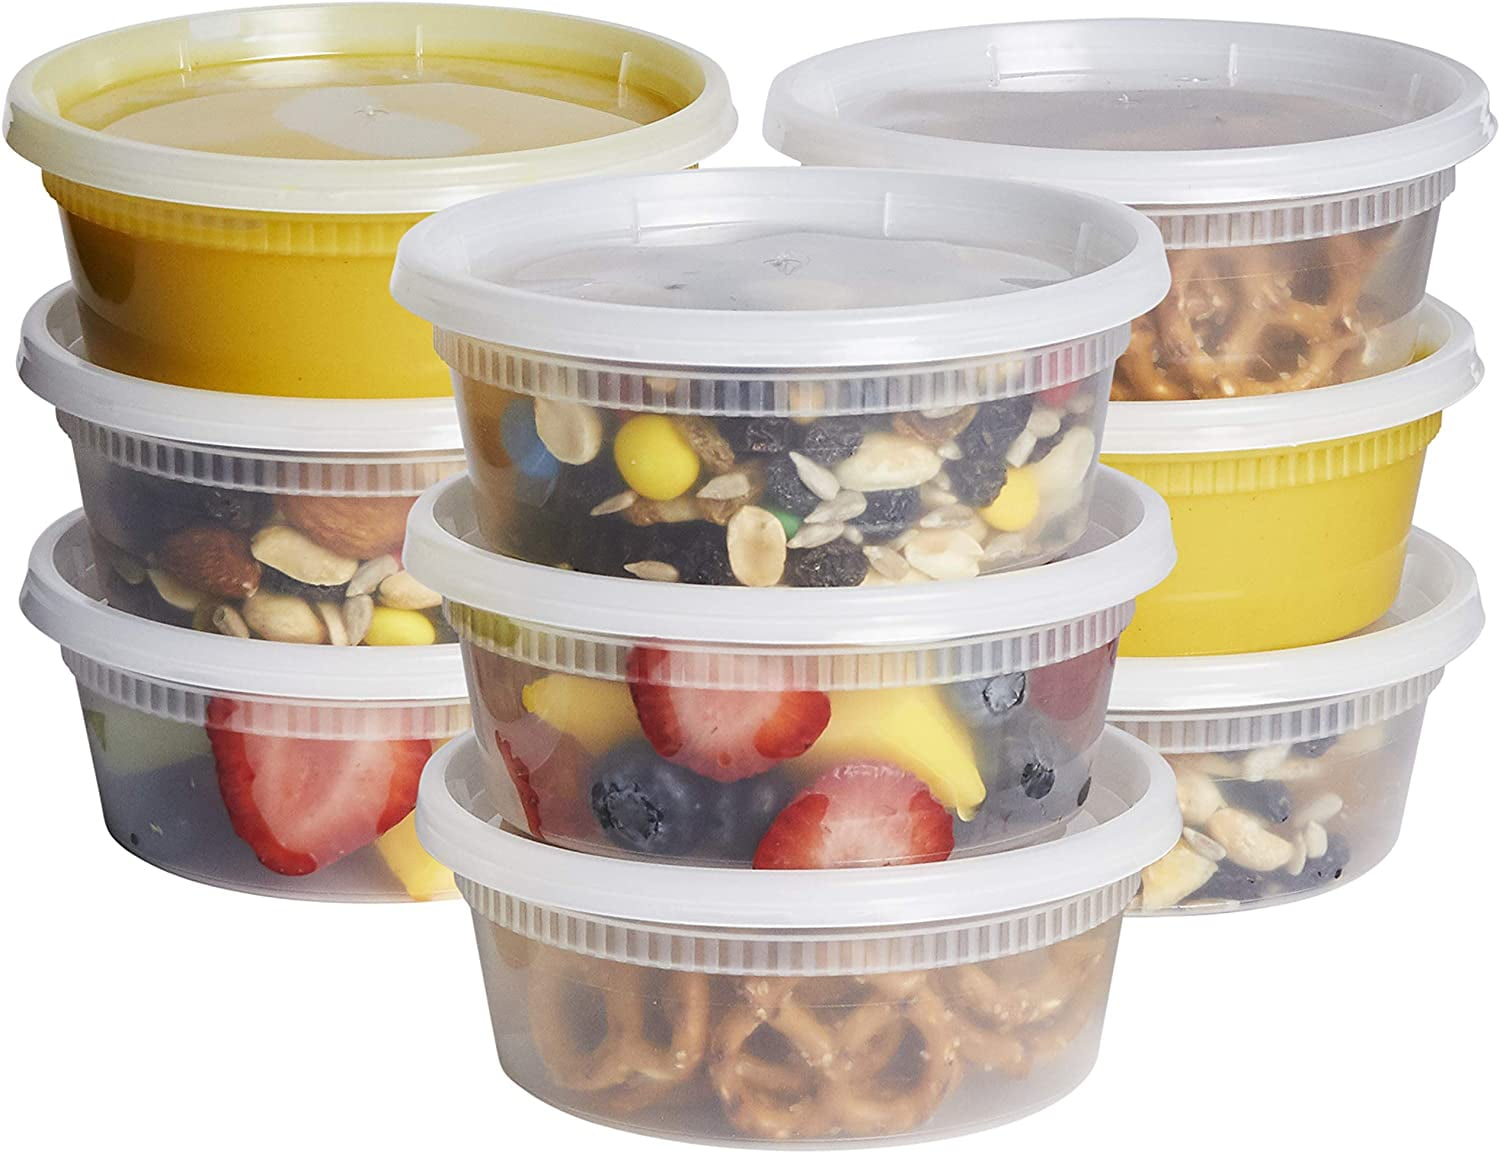 Extreme Freeze Reditainer Freezeable Deli Food Containers w/ Lids - Food  Storage (12 Ounce - Package of 40)